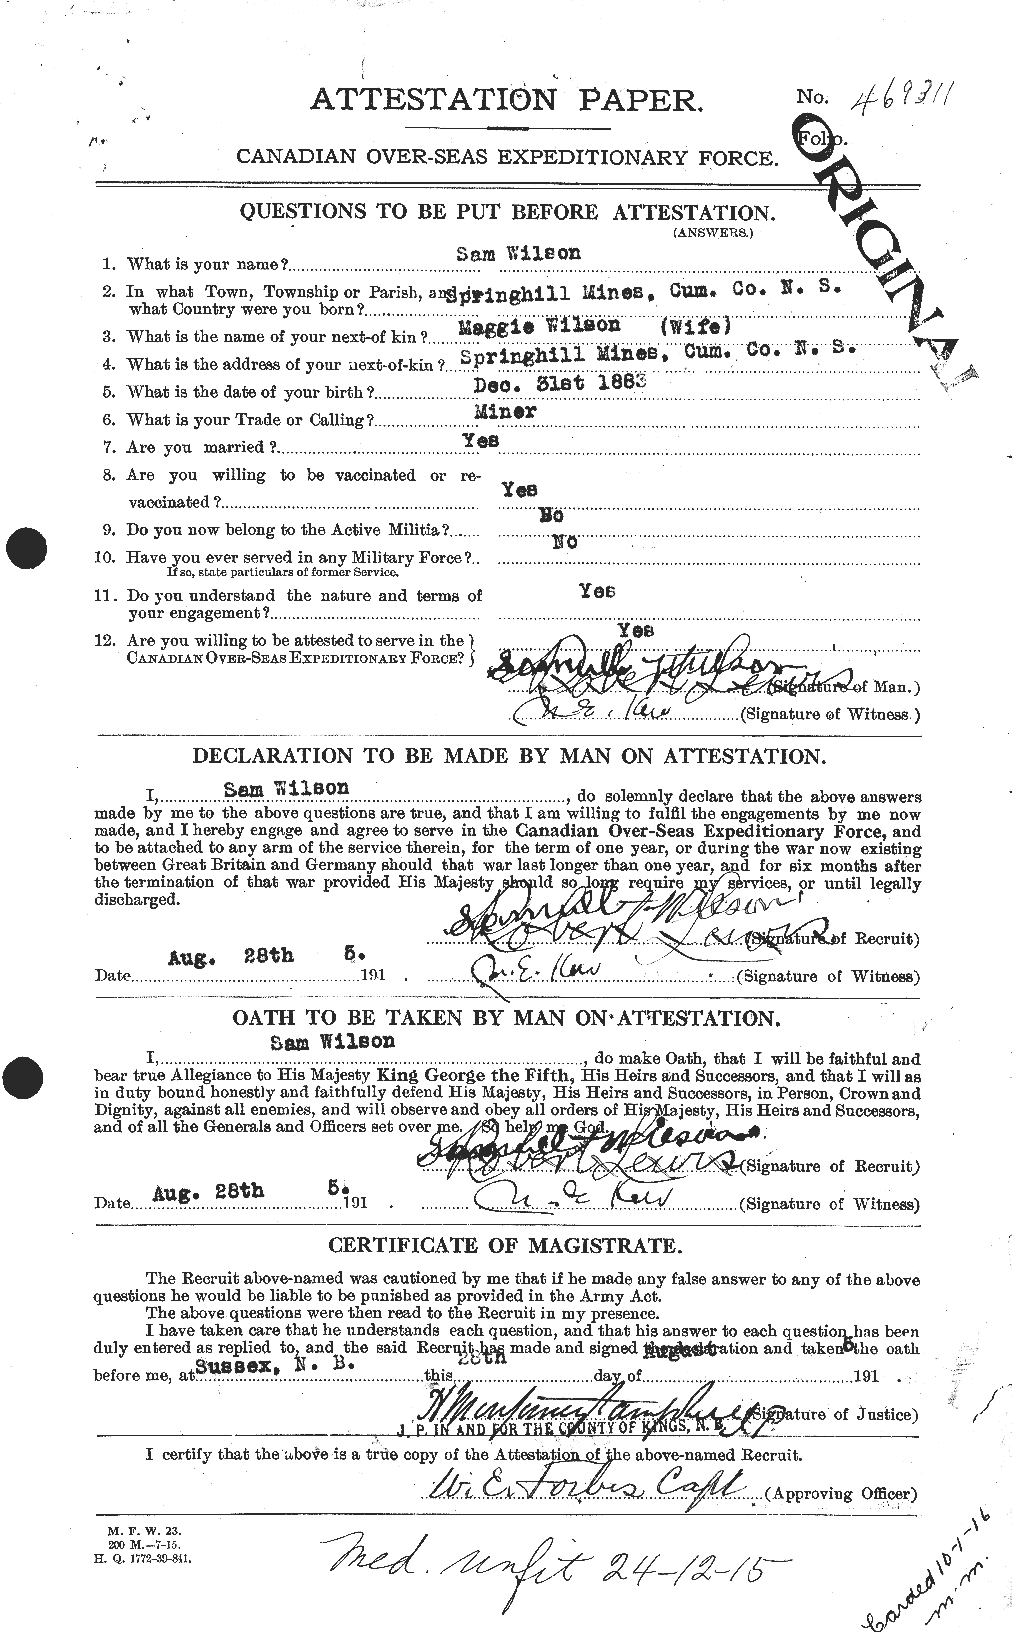 Personnel Records of the First World War - CEF 681088a